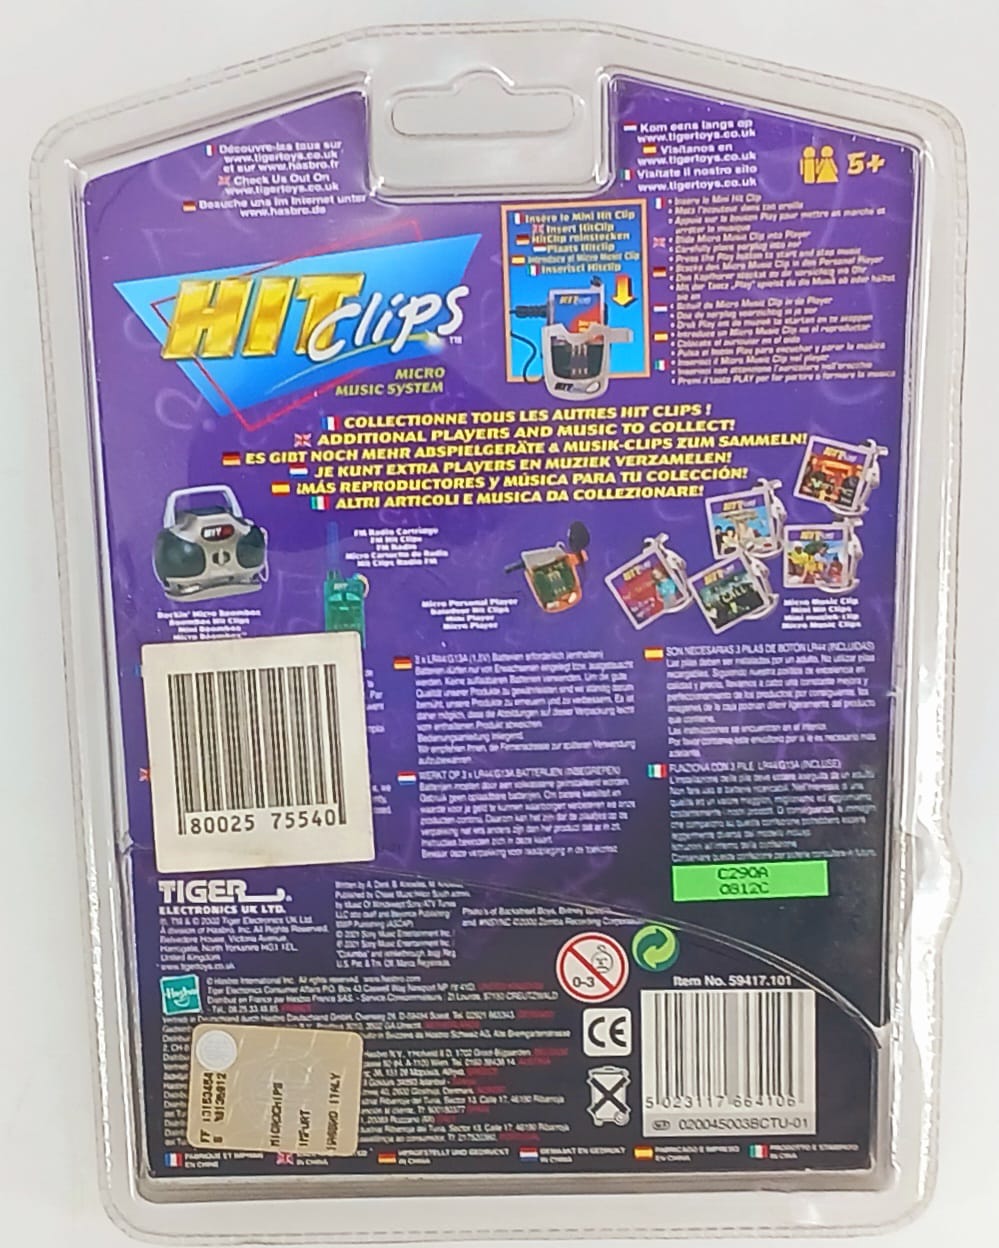 Hit Clips Micro Personal player Micromix survivor